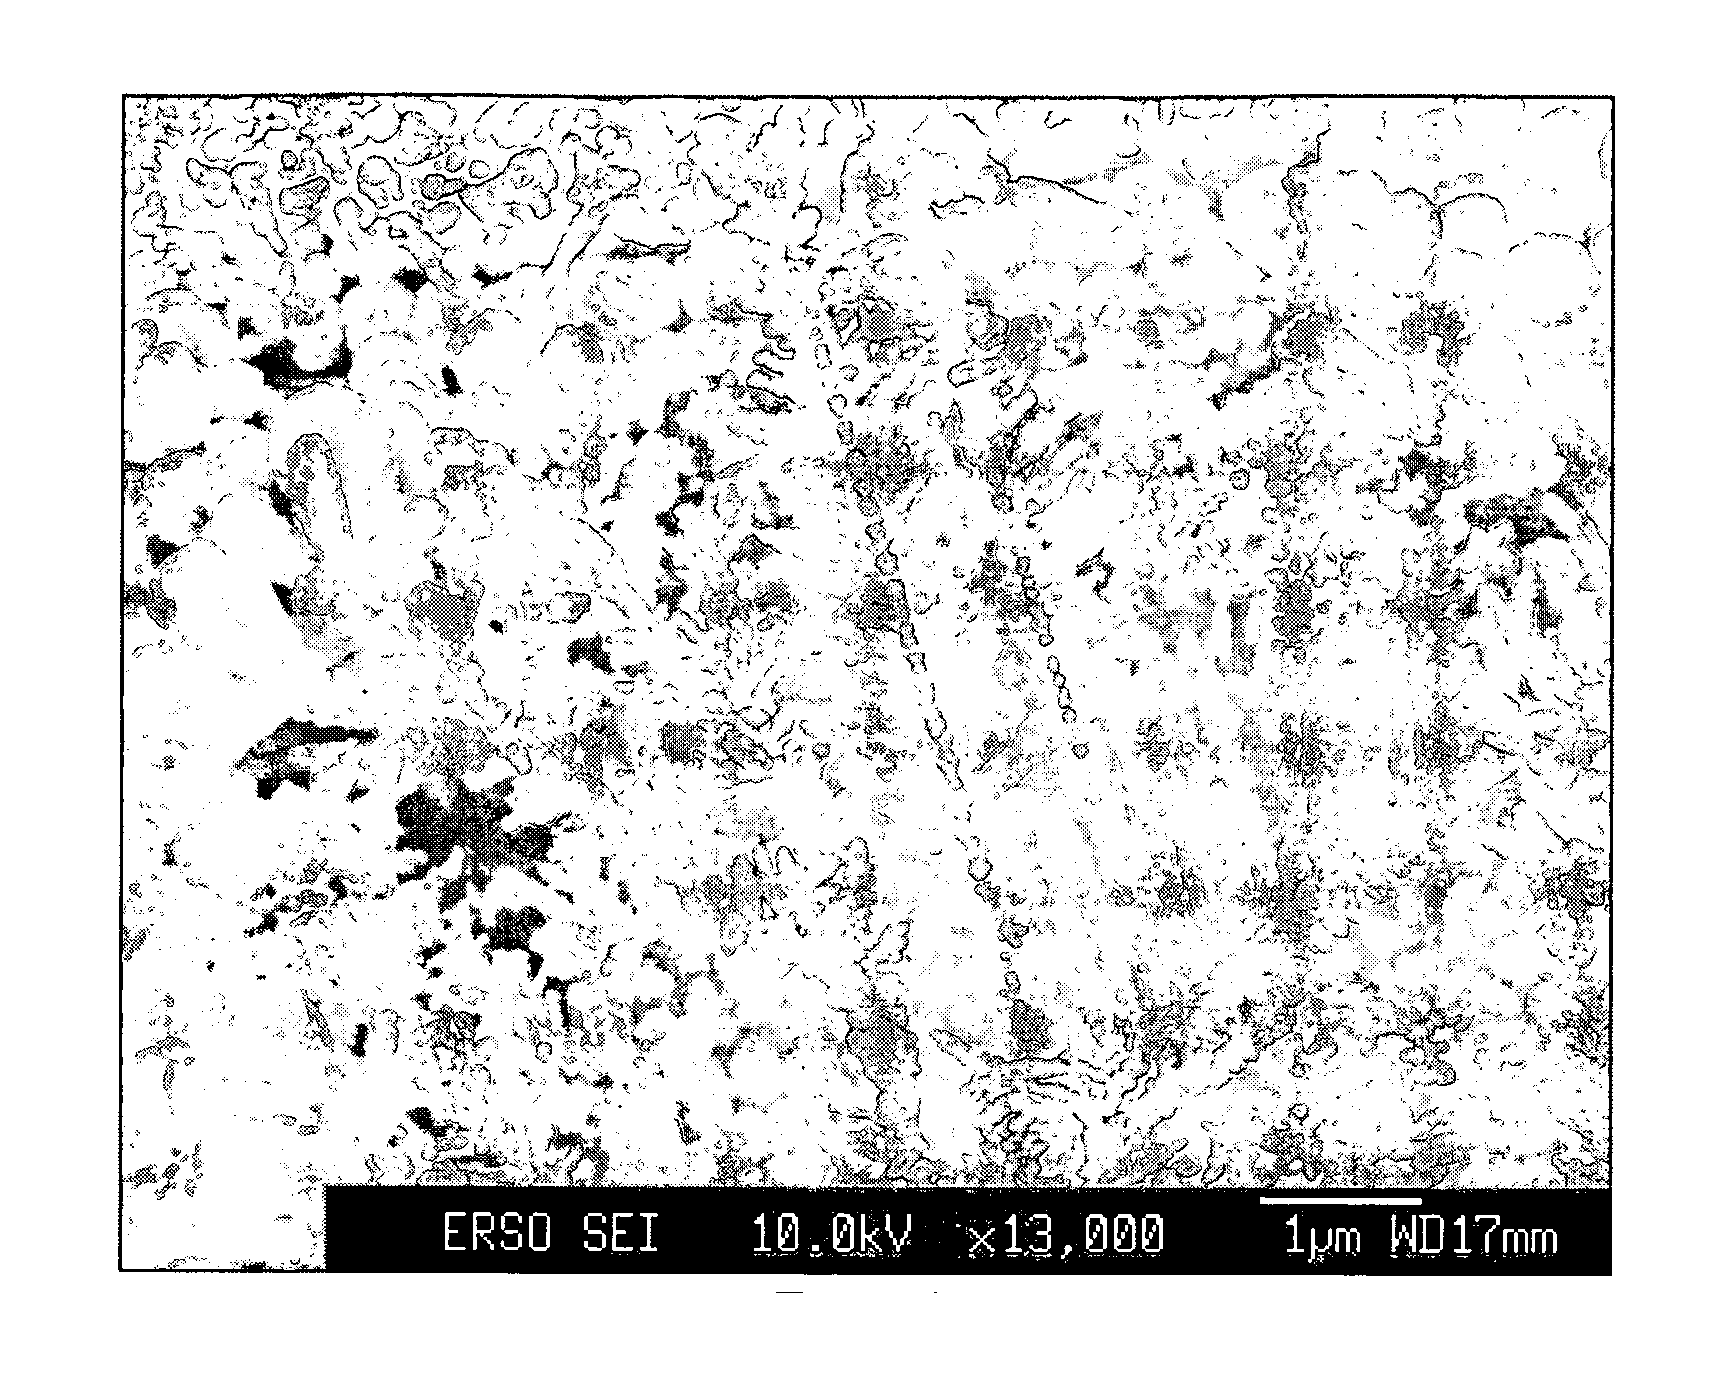 Method of making an electroplated interconnection wire of a composite of metal and carbon nanotubes